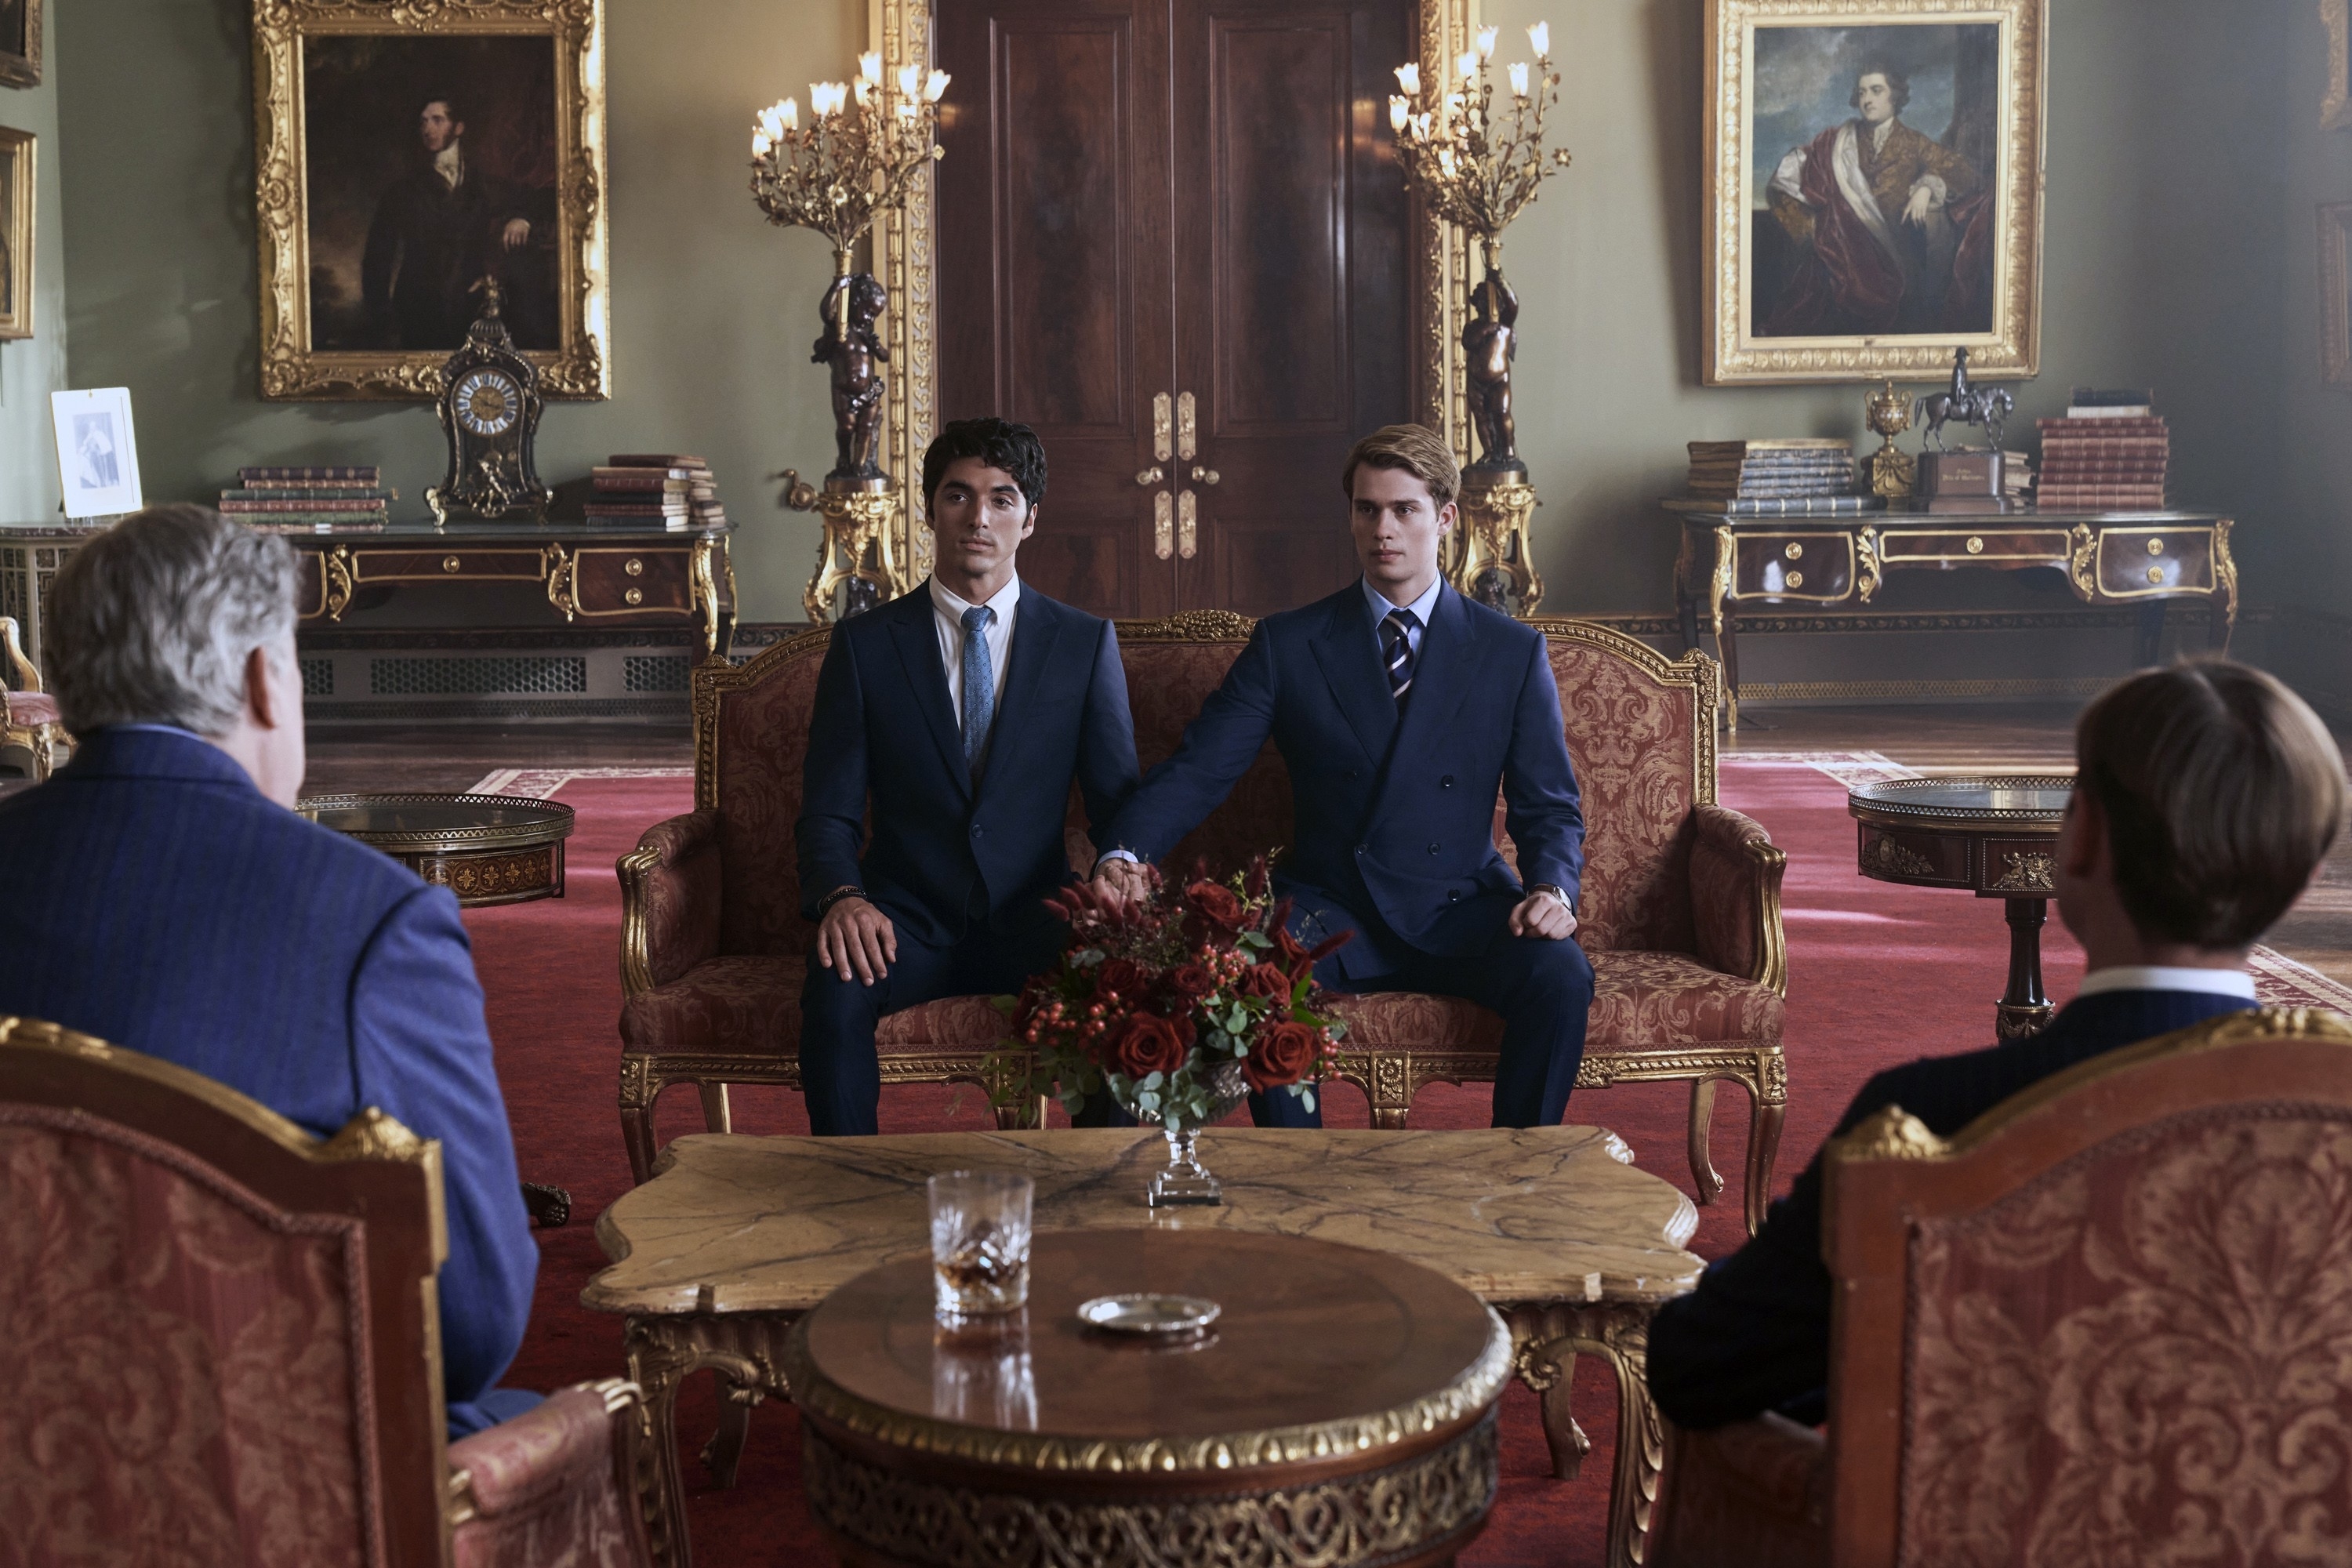 taylor and nicholas holding hands sitting in a regal room in the film